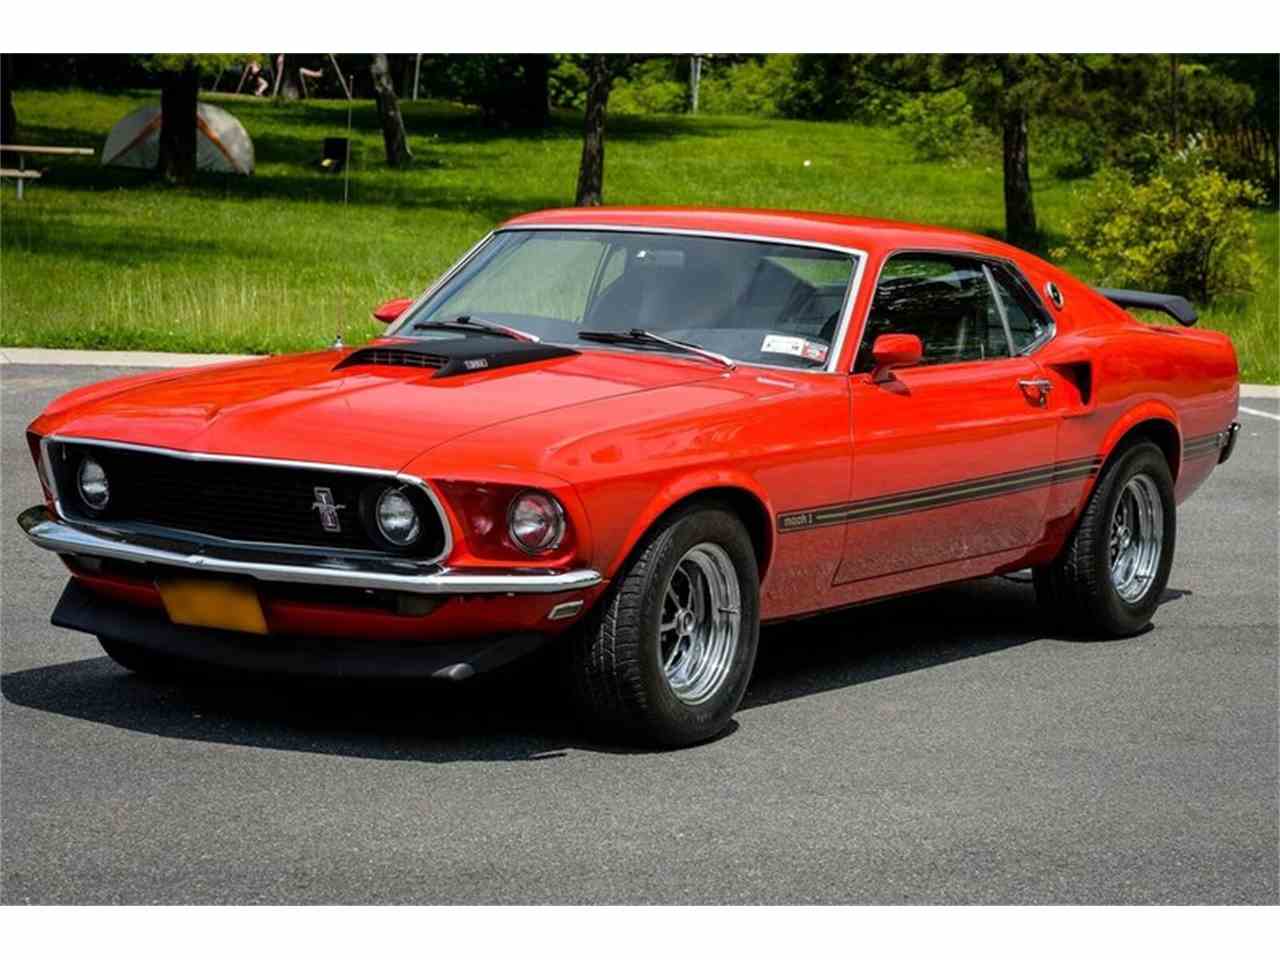 1969 Mach 1 Ford Mustang